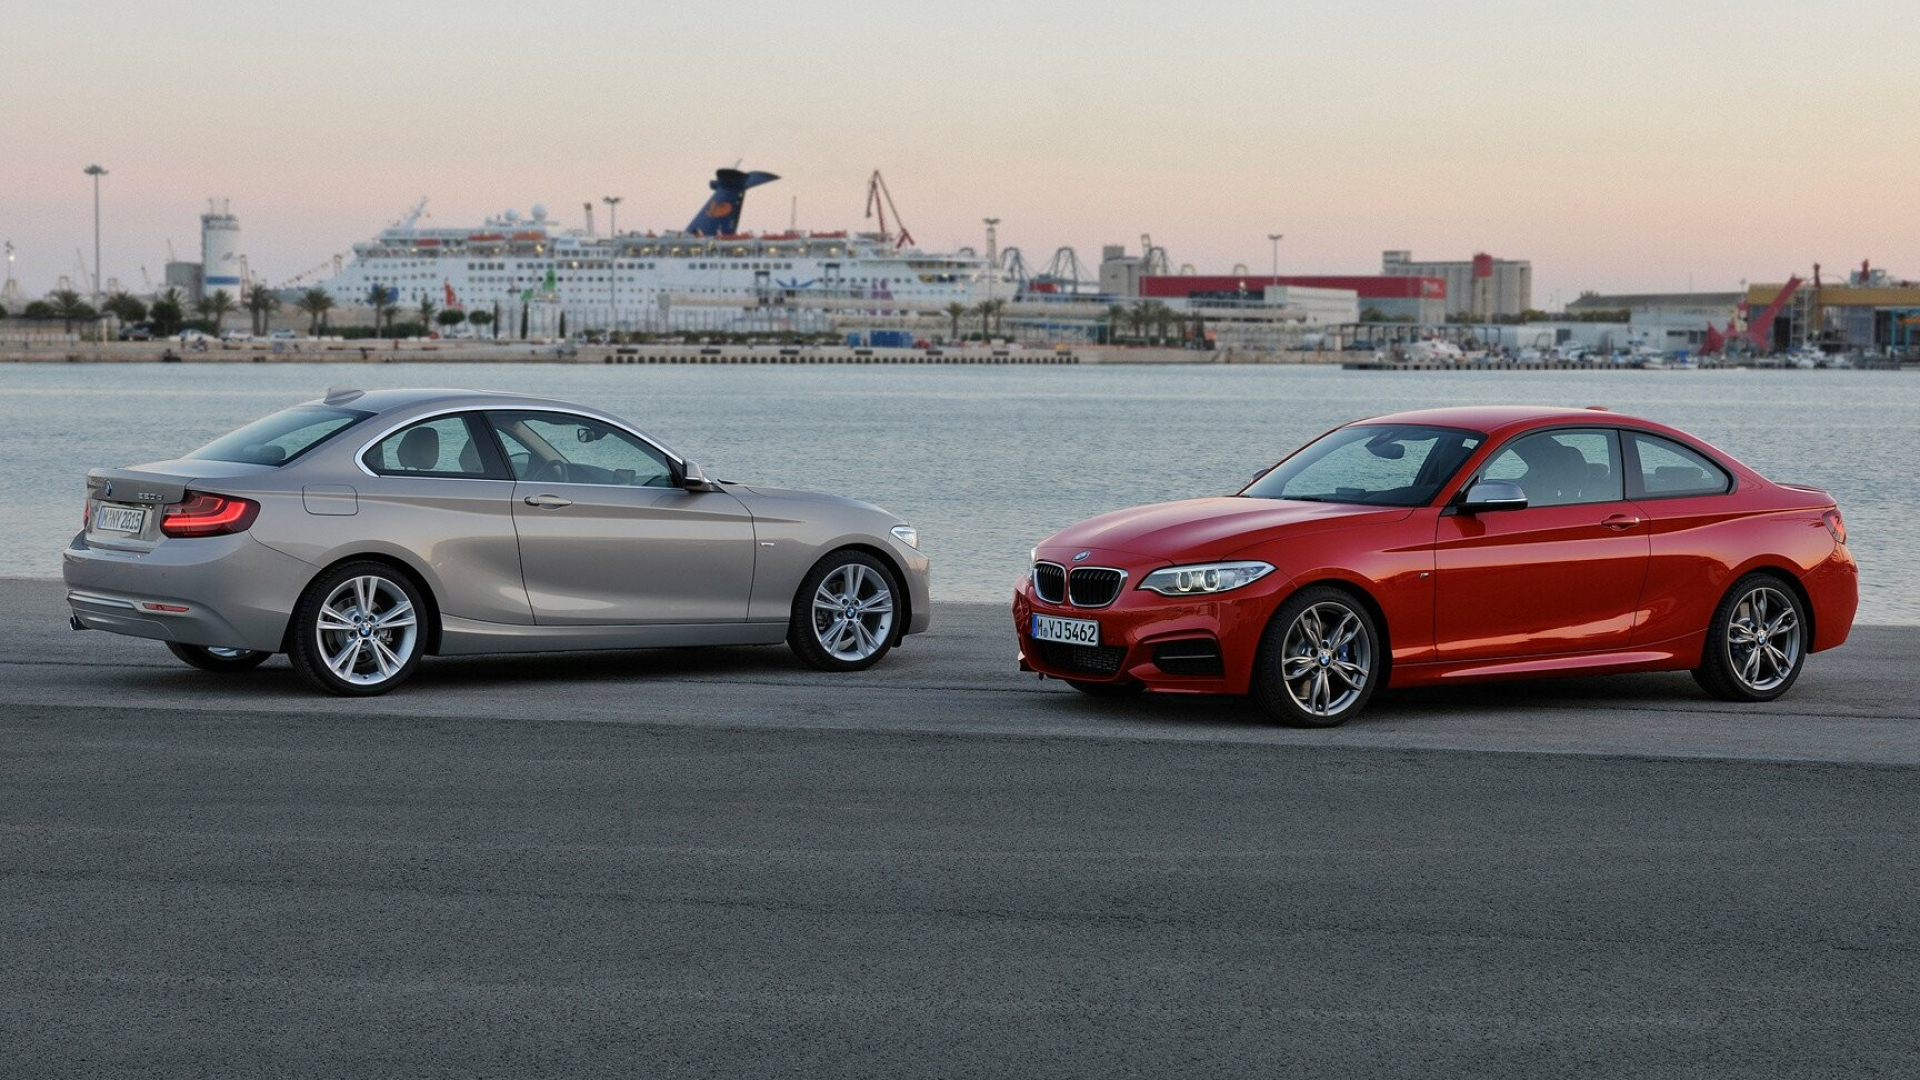 BMW 2 Series: A rear-wheel-drive 2-door coupe, F22 model code. 1920x1080 Full HD Background.